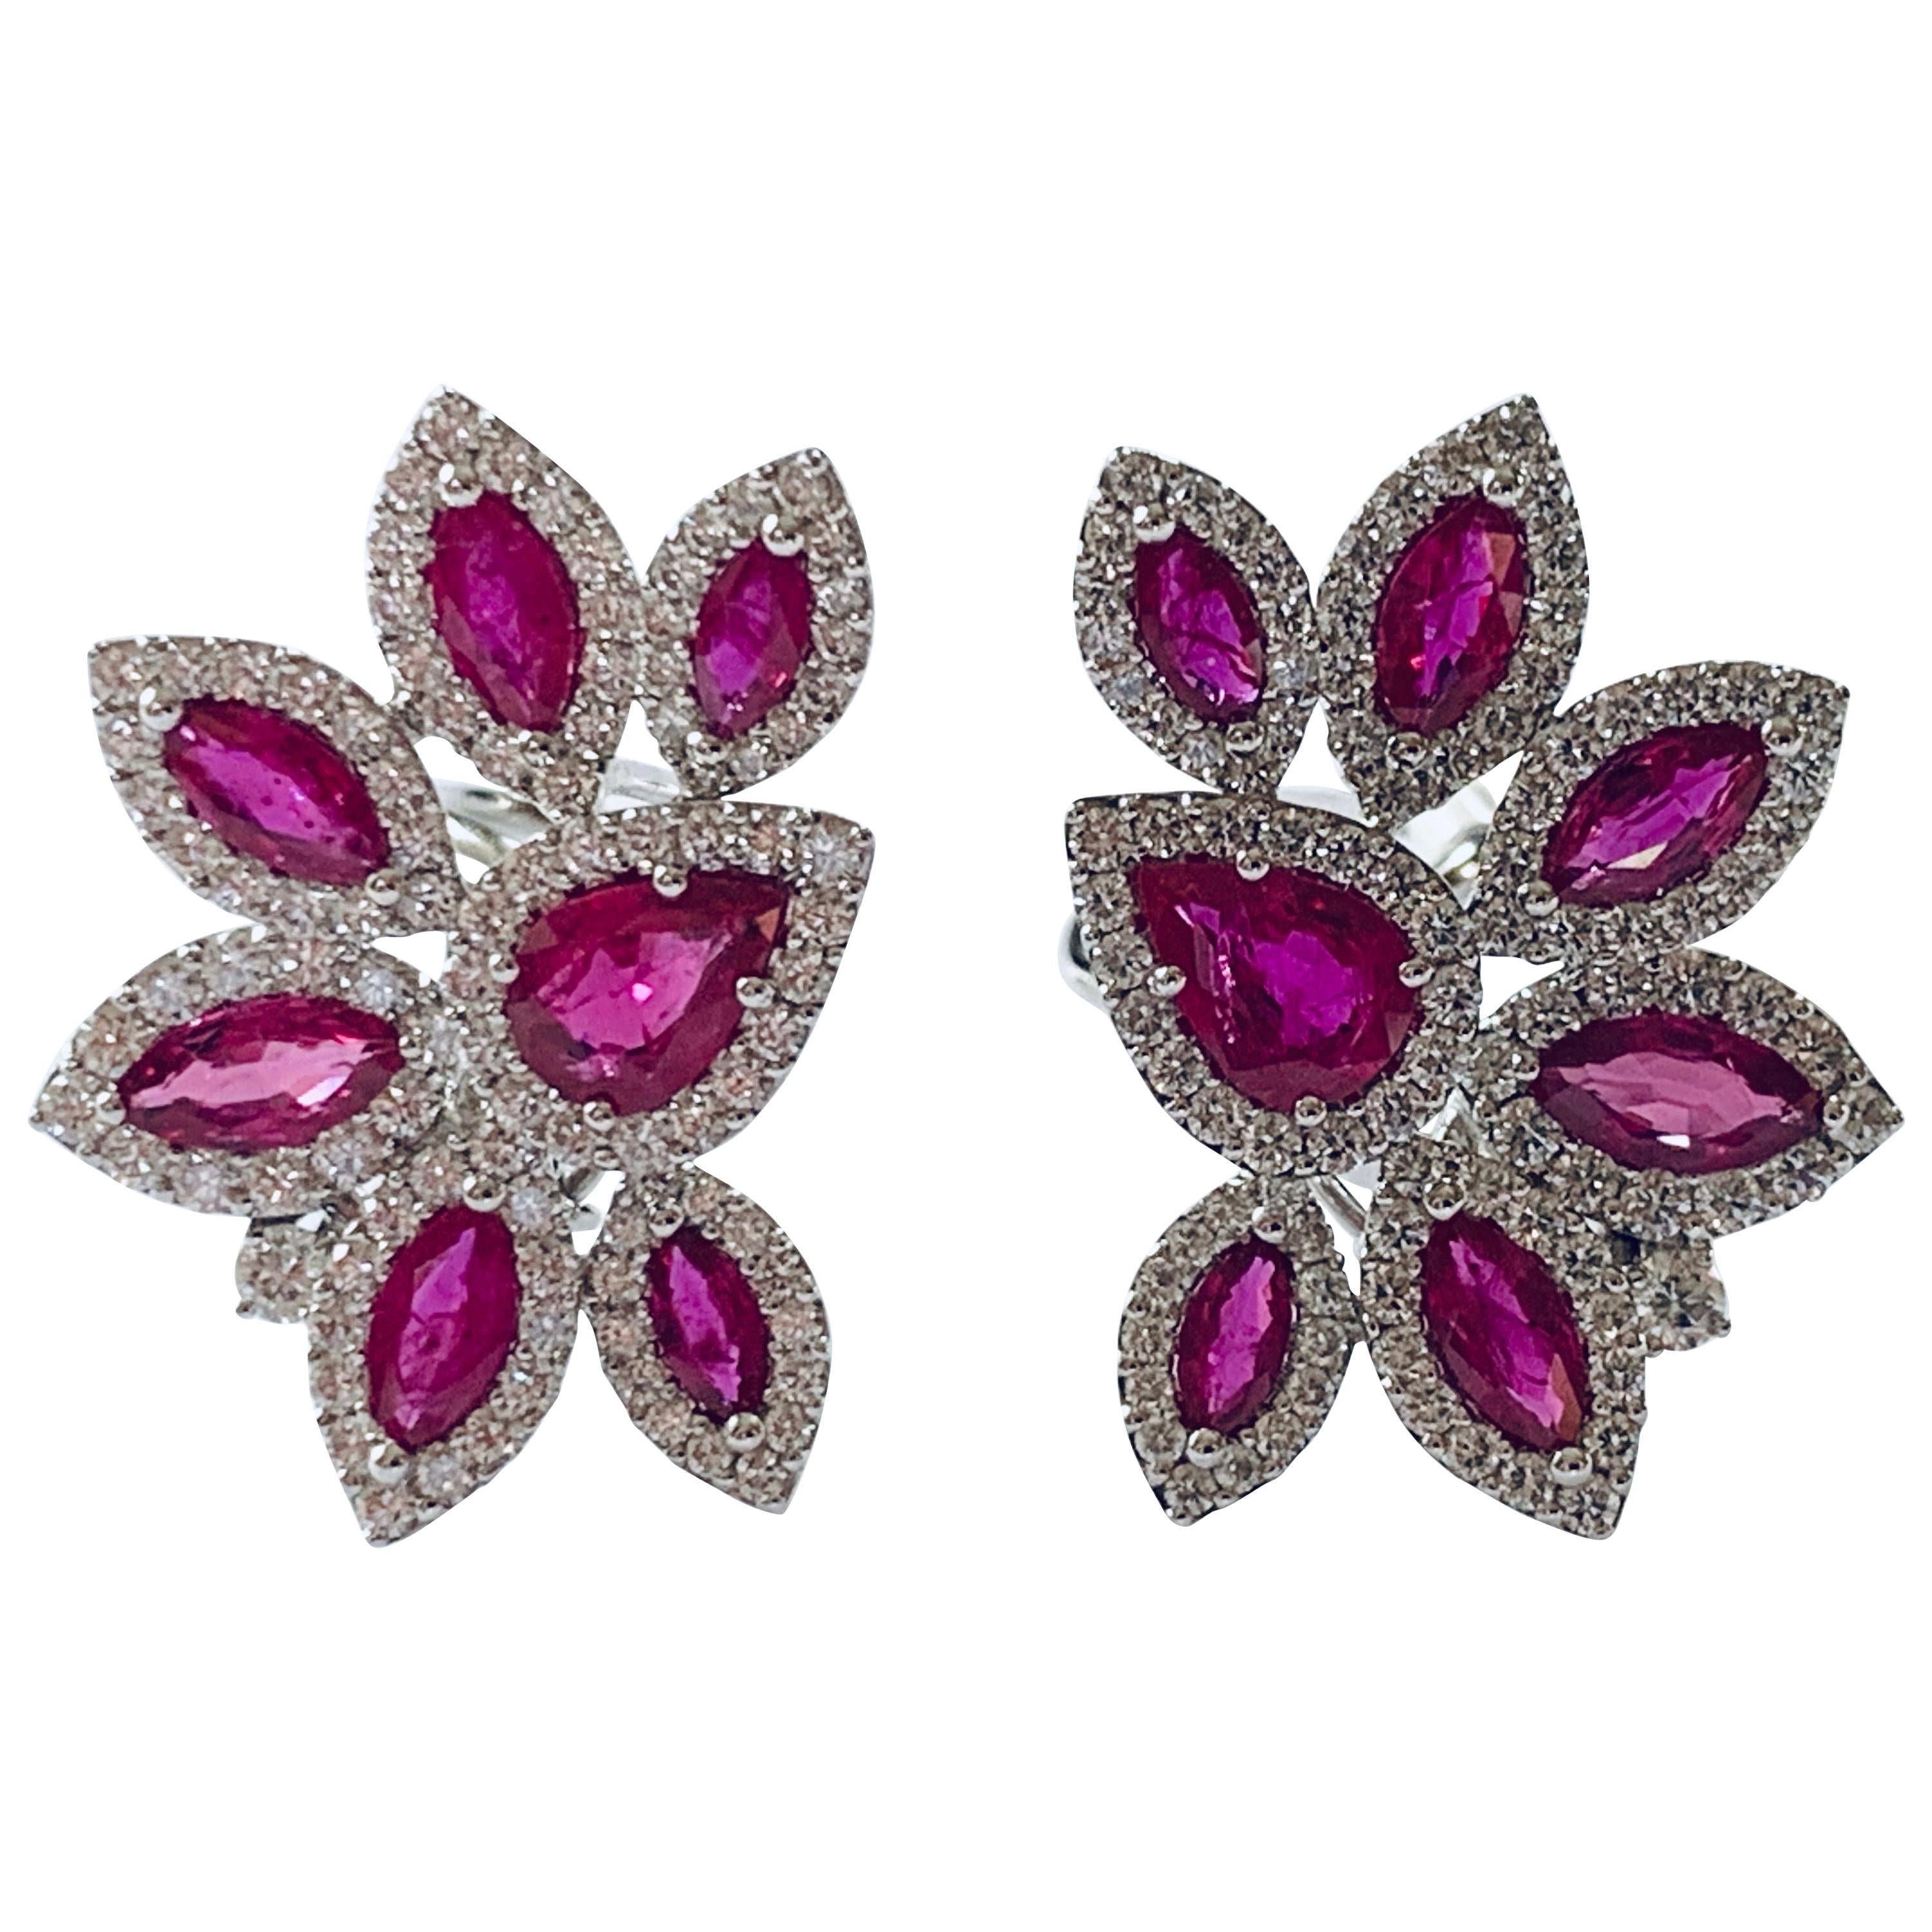 Elegant and Classy 18 Karat White Gold Ruby and Diamond Cluster Earrings For Sale